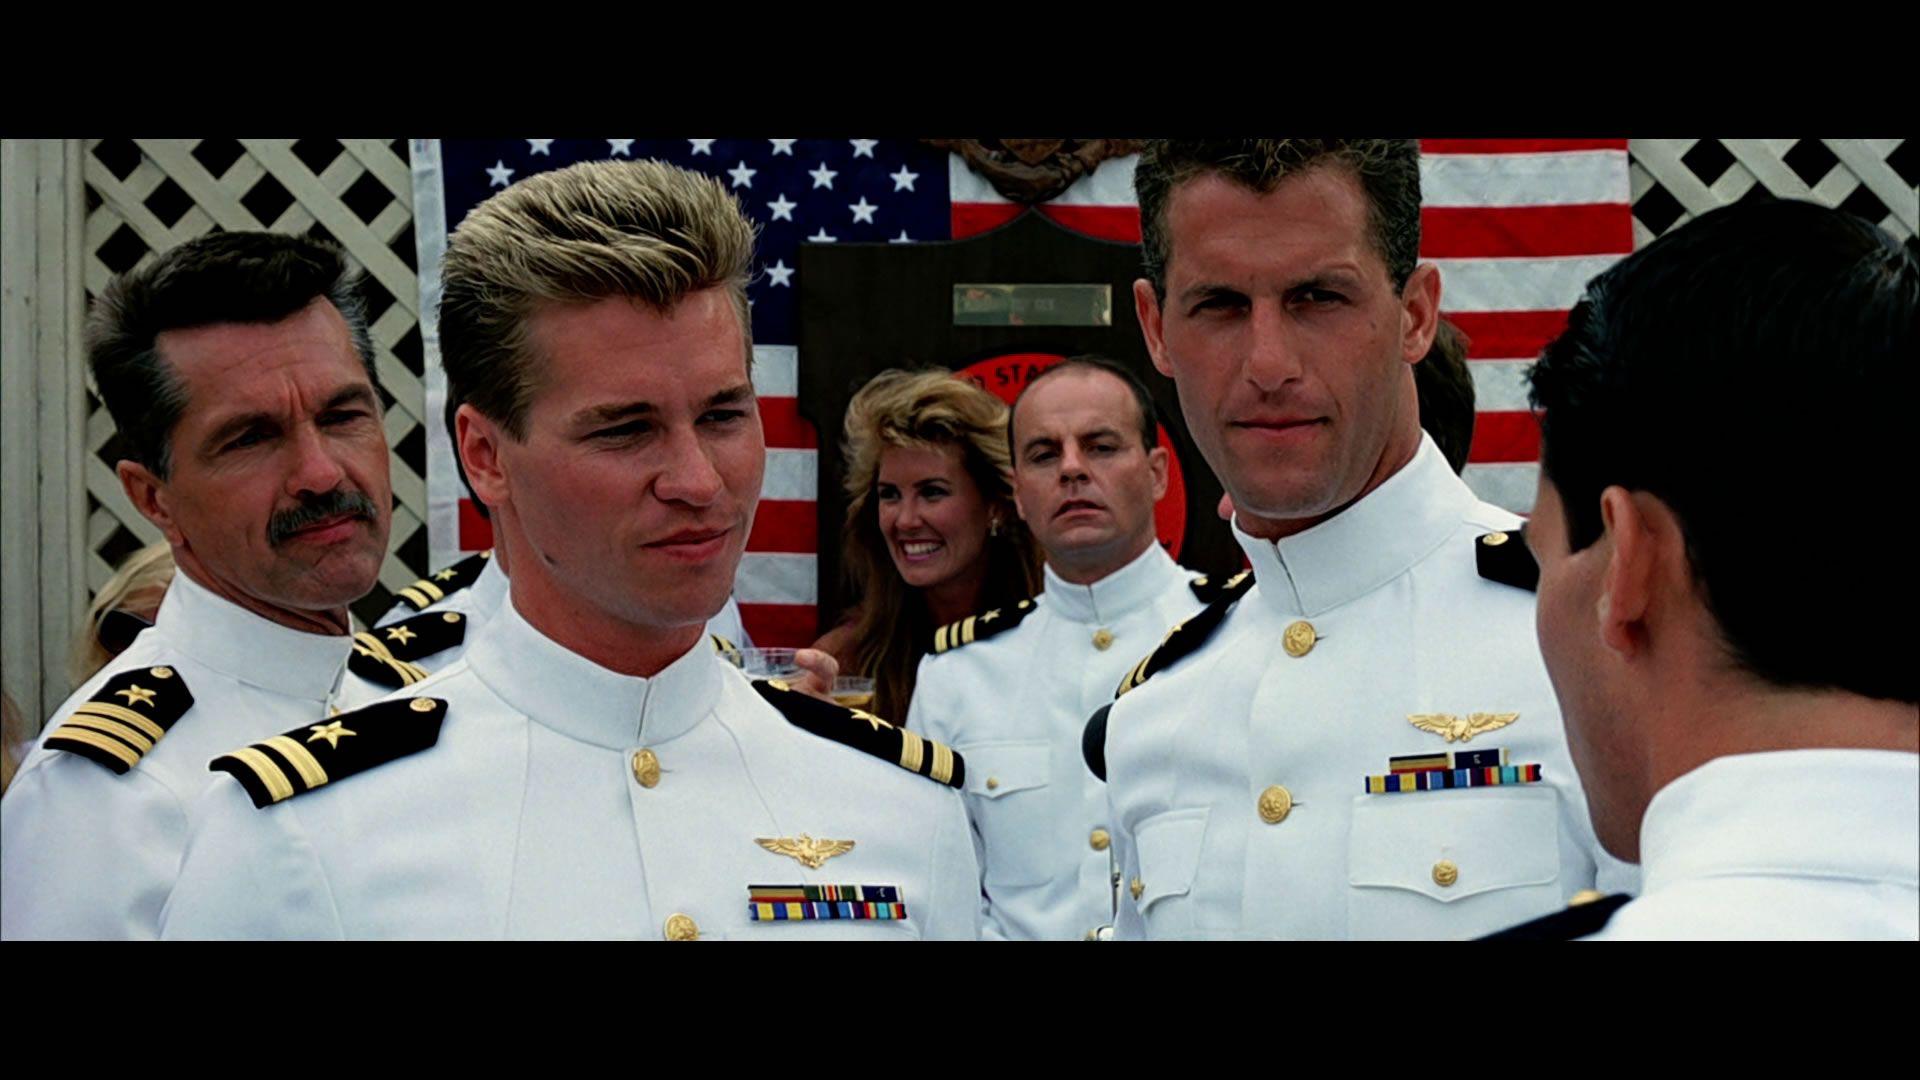 To Be Top Gun in the NFL, Your QB Should Be More Iceman Than